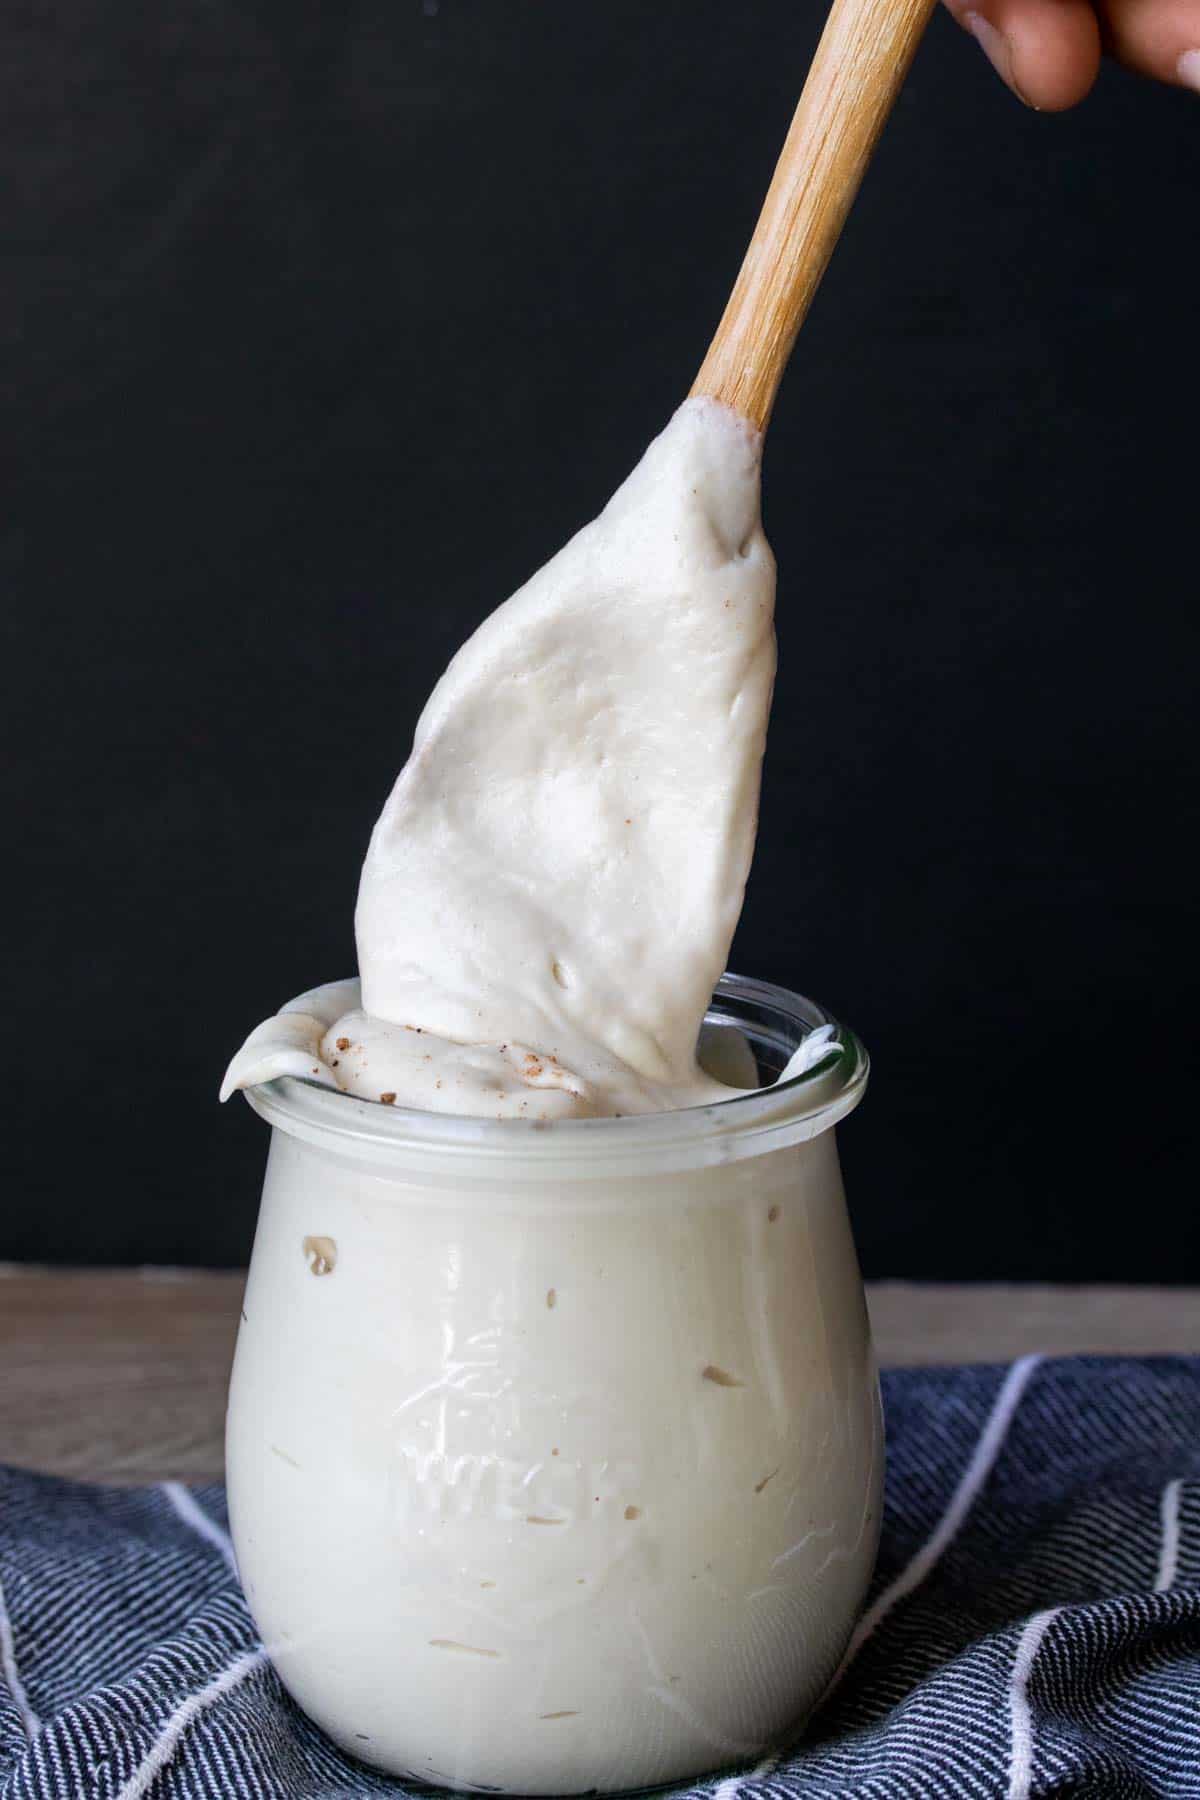 A wooden spoon coming out of a jar covered in a white sauce